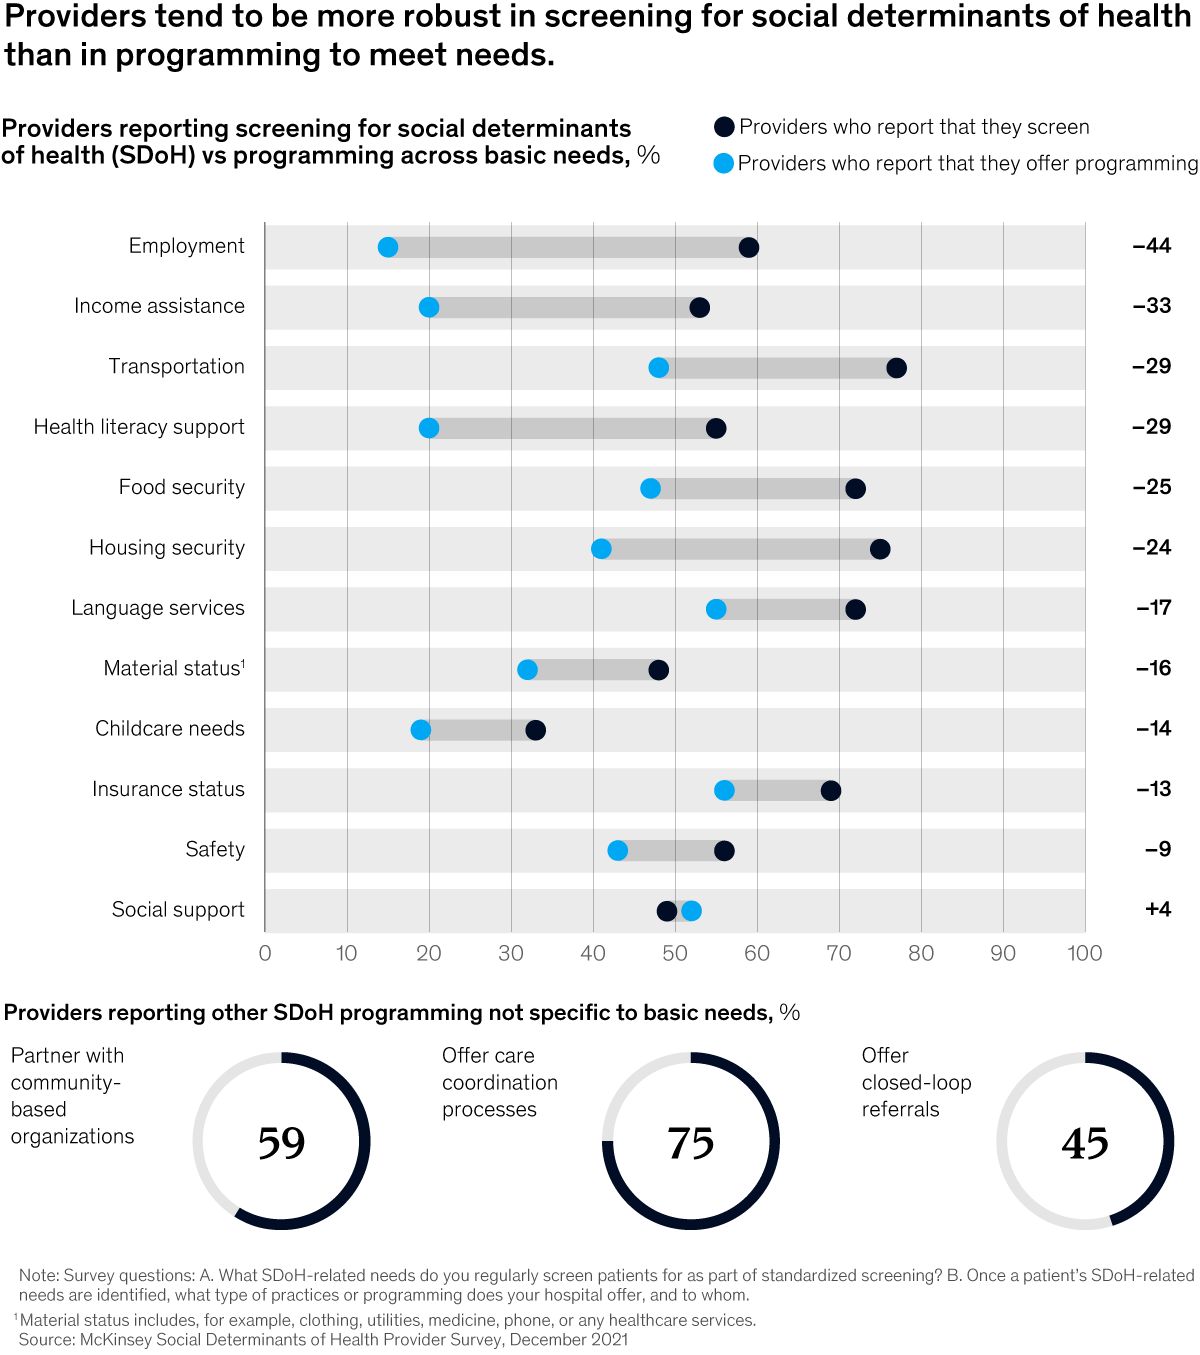 Chart detailing that health care providers tend to be more robust in screening for social determinants of health than in programming to meet needs.